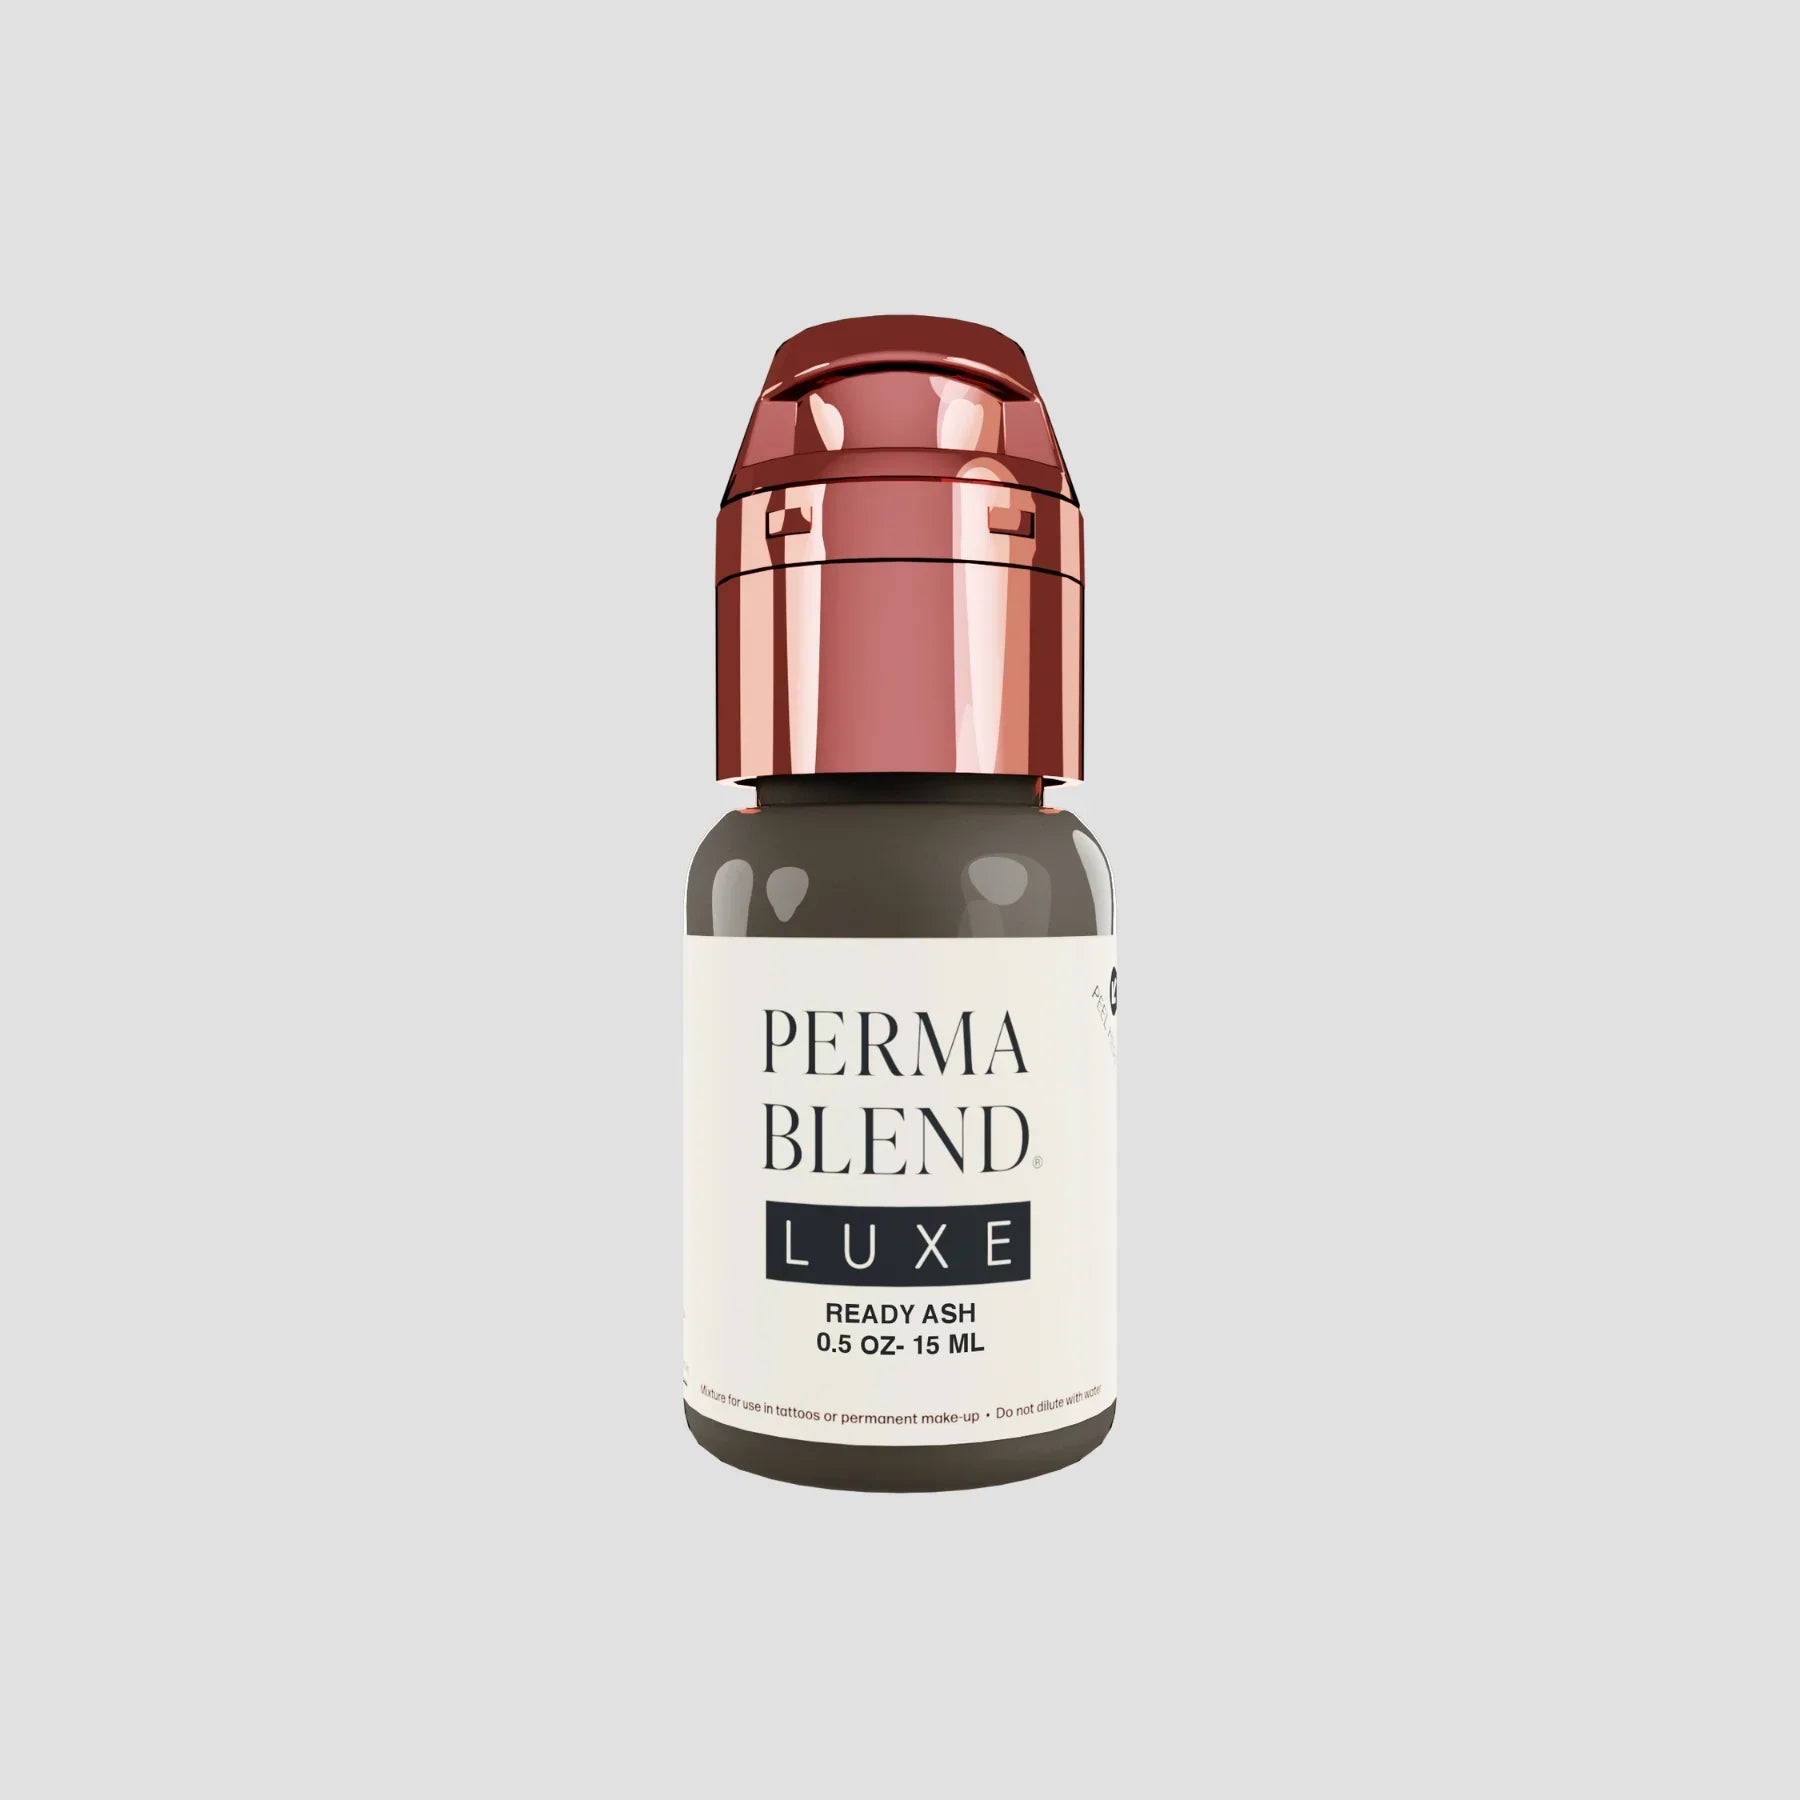 Perma Blend Luxe Pigment Ready Ash Pre-Modified Eyebrow Pigment, Permanent Makeup Pigment